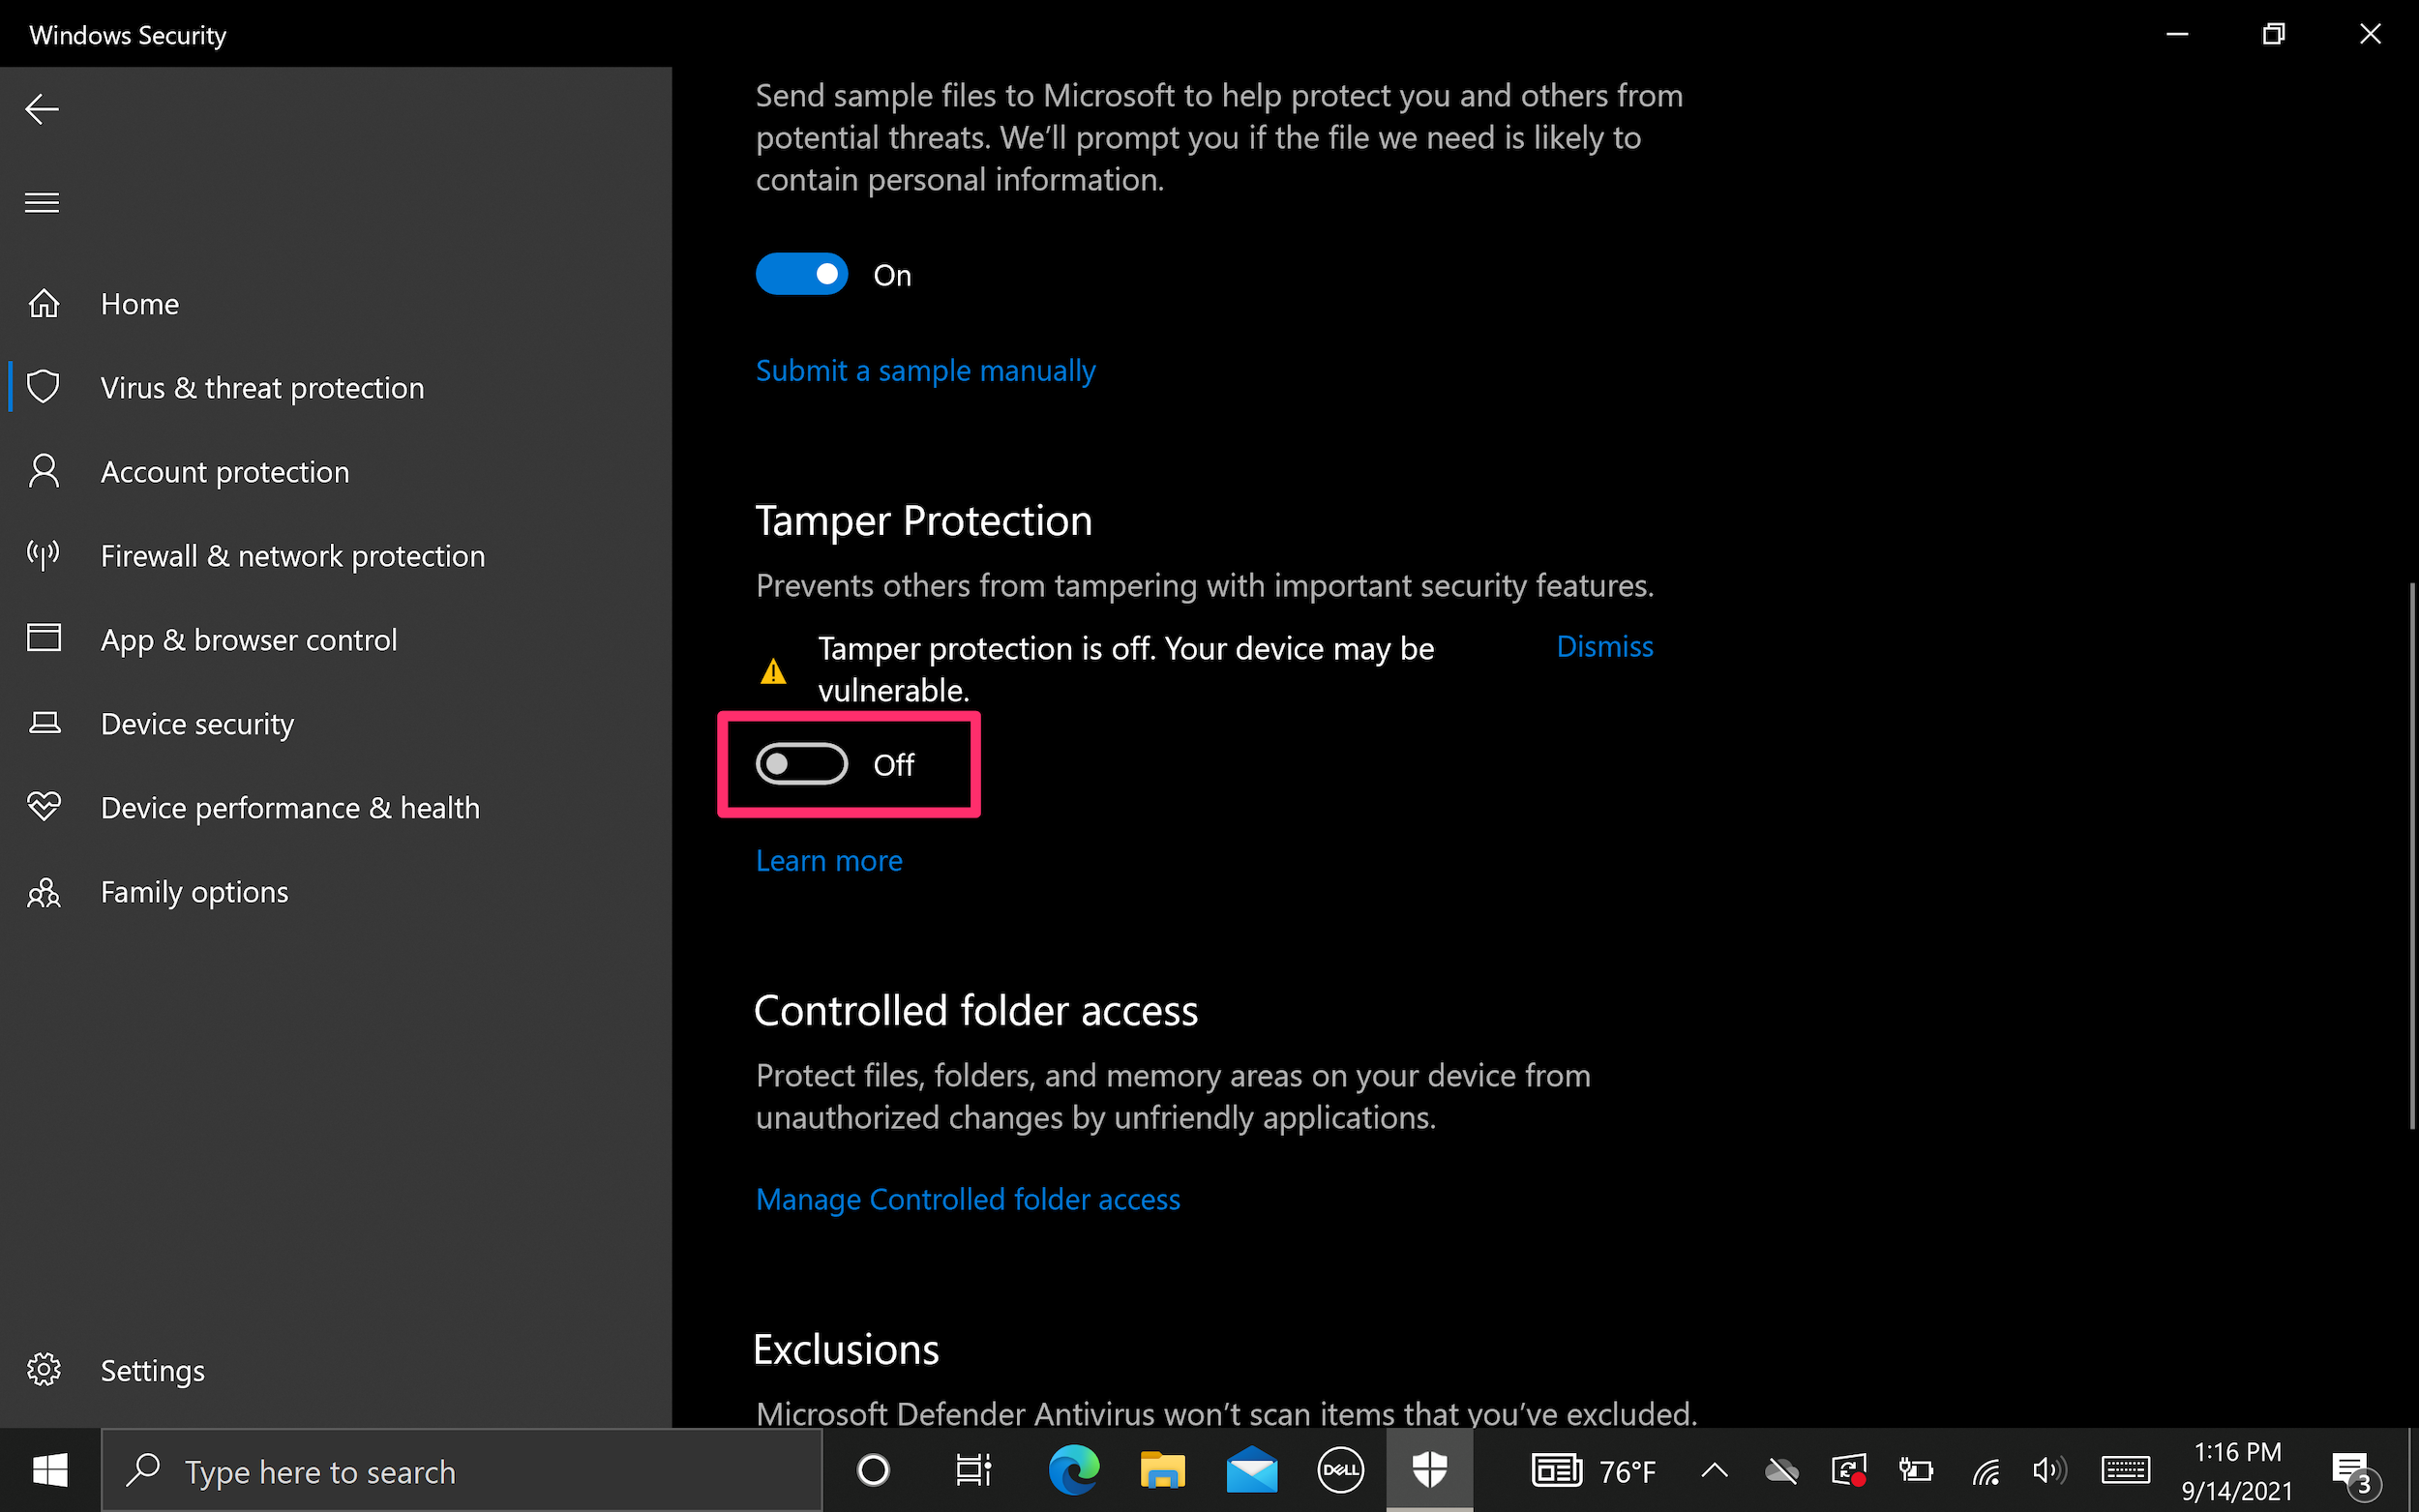 Screenshot of Tamper Protection toggle button in Windows Settings